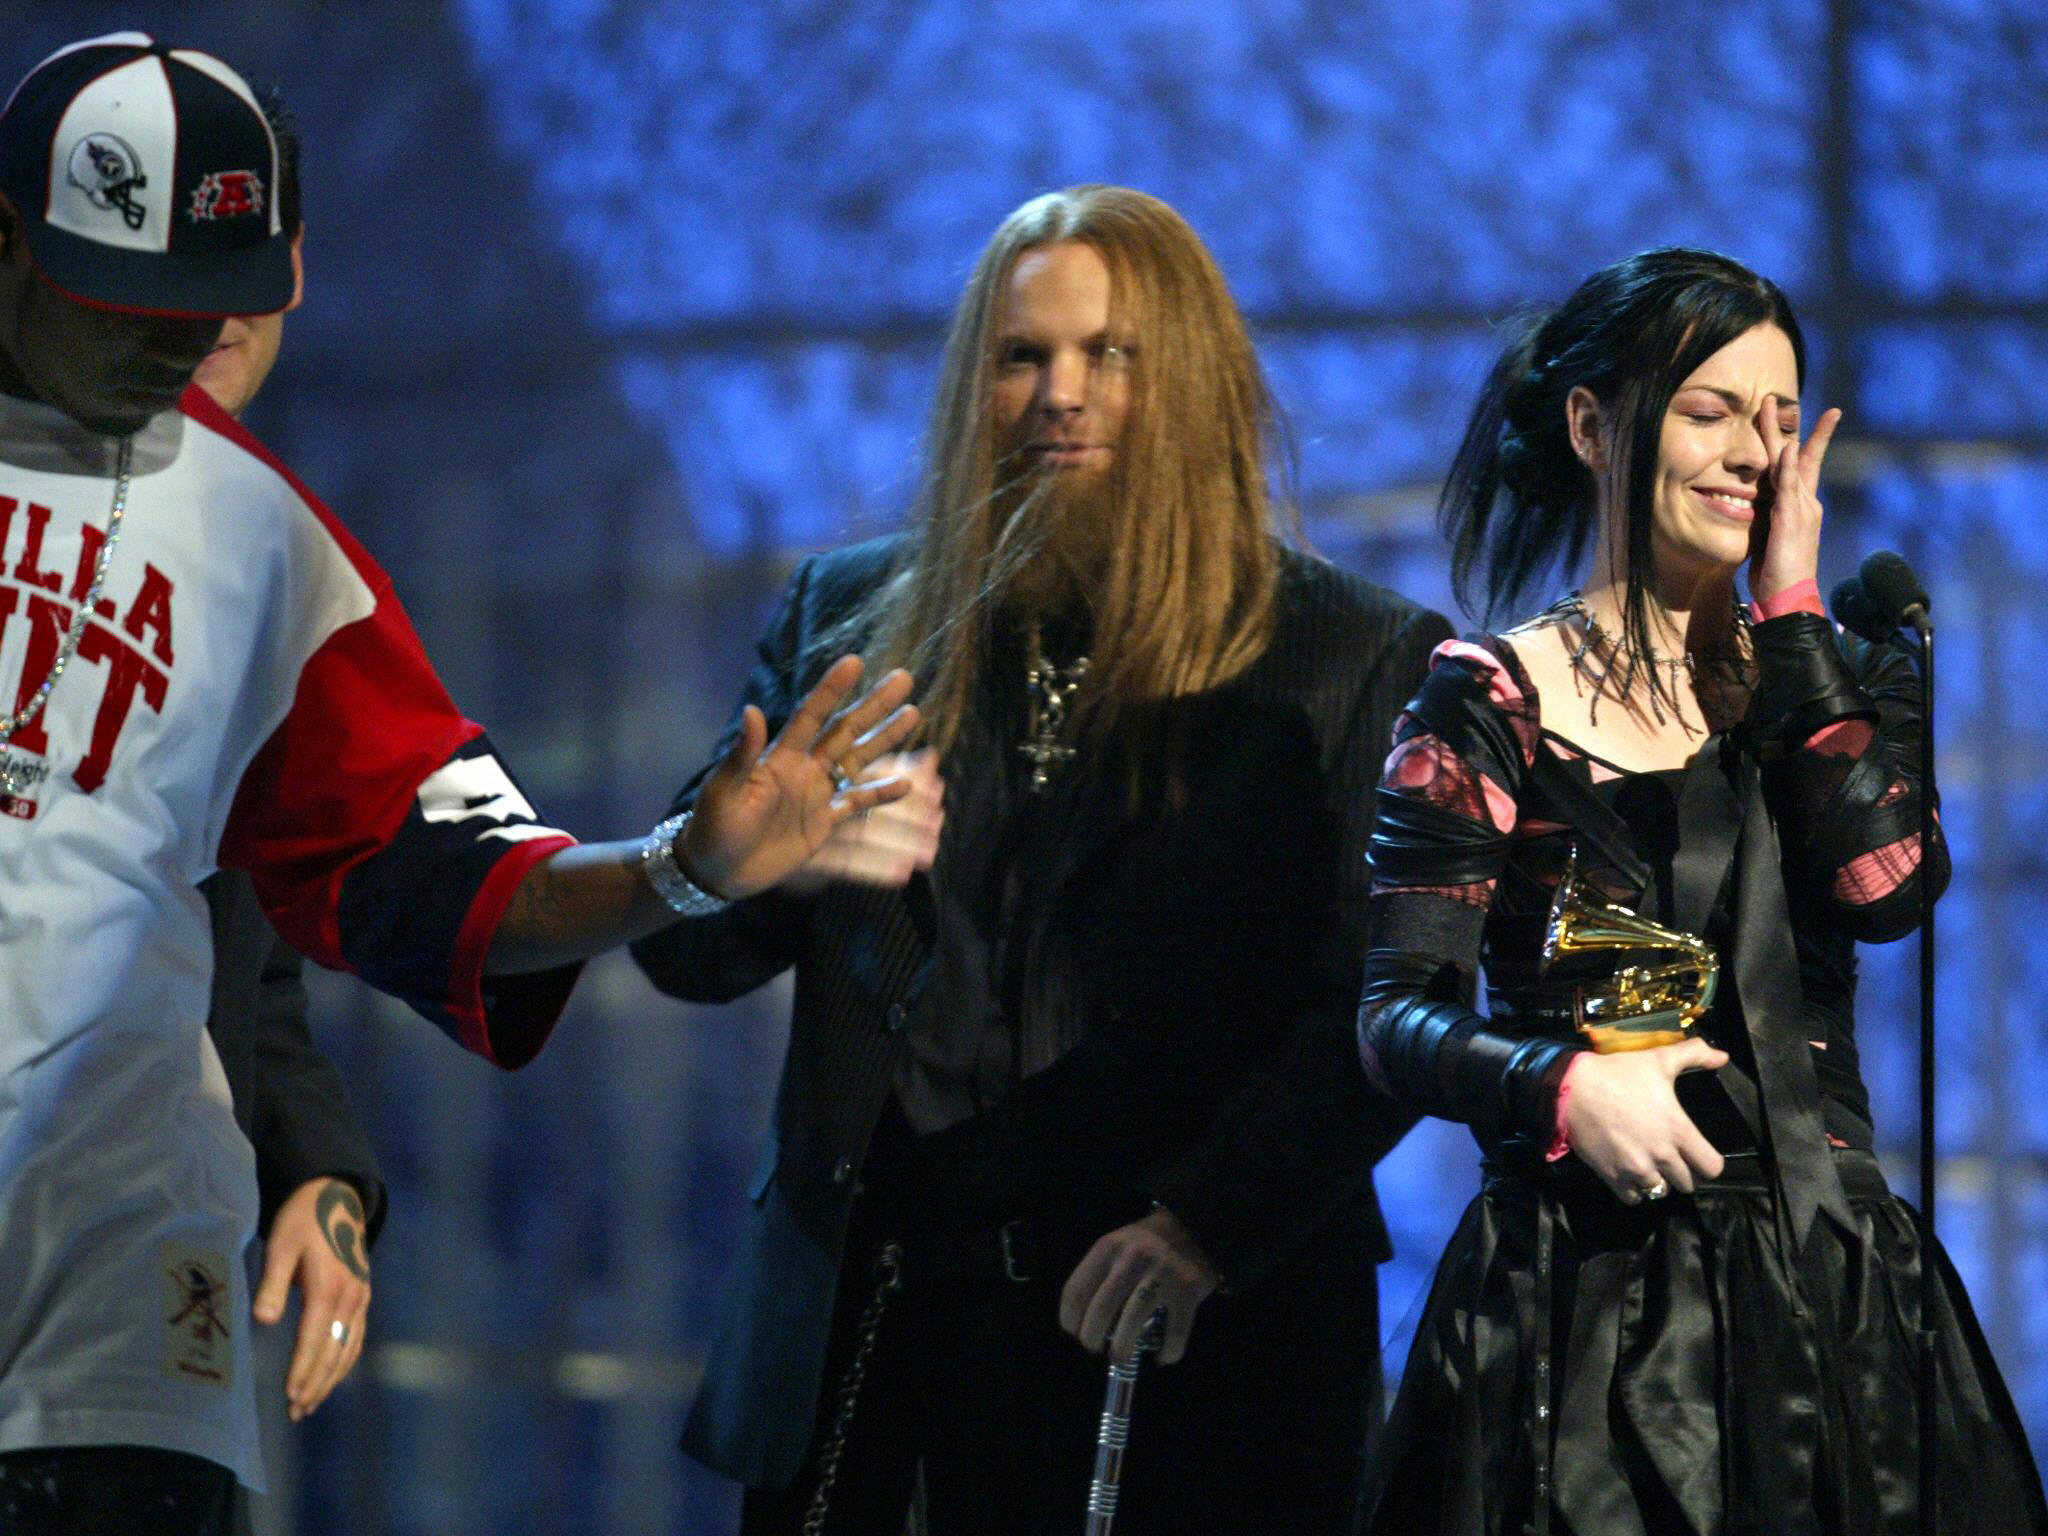 Evanescence accepts their Grammy for Bes